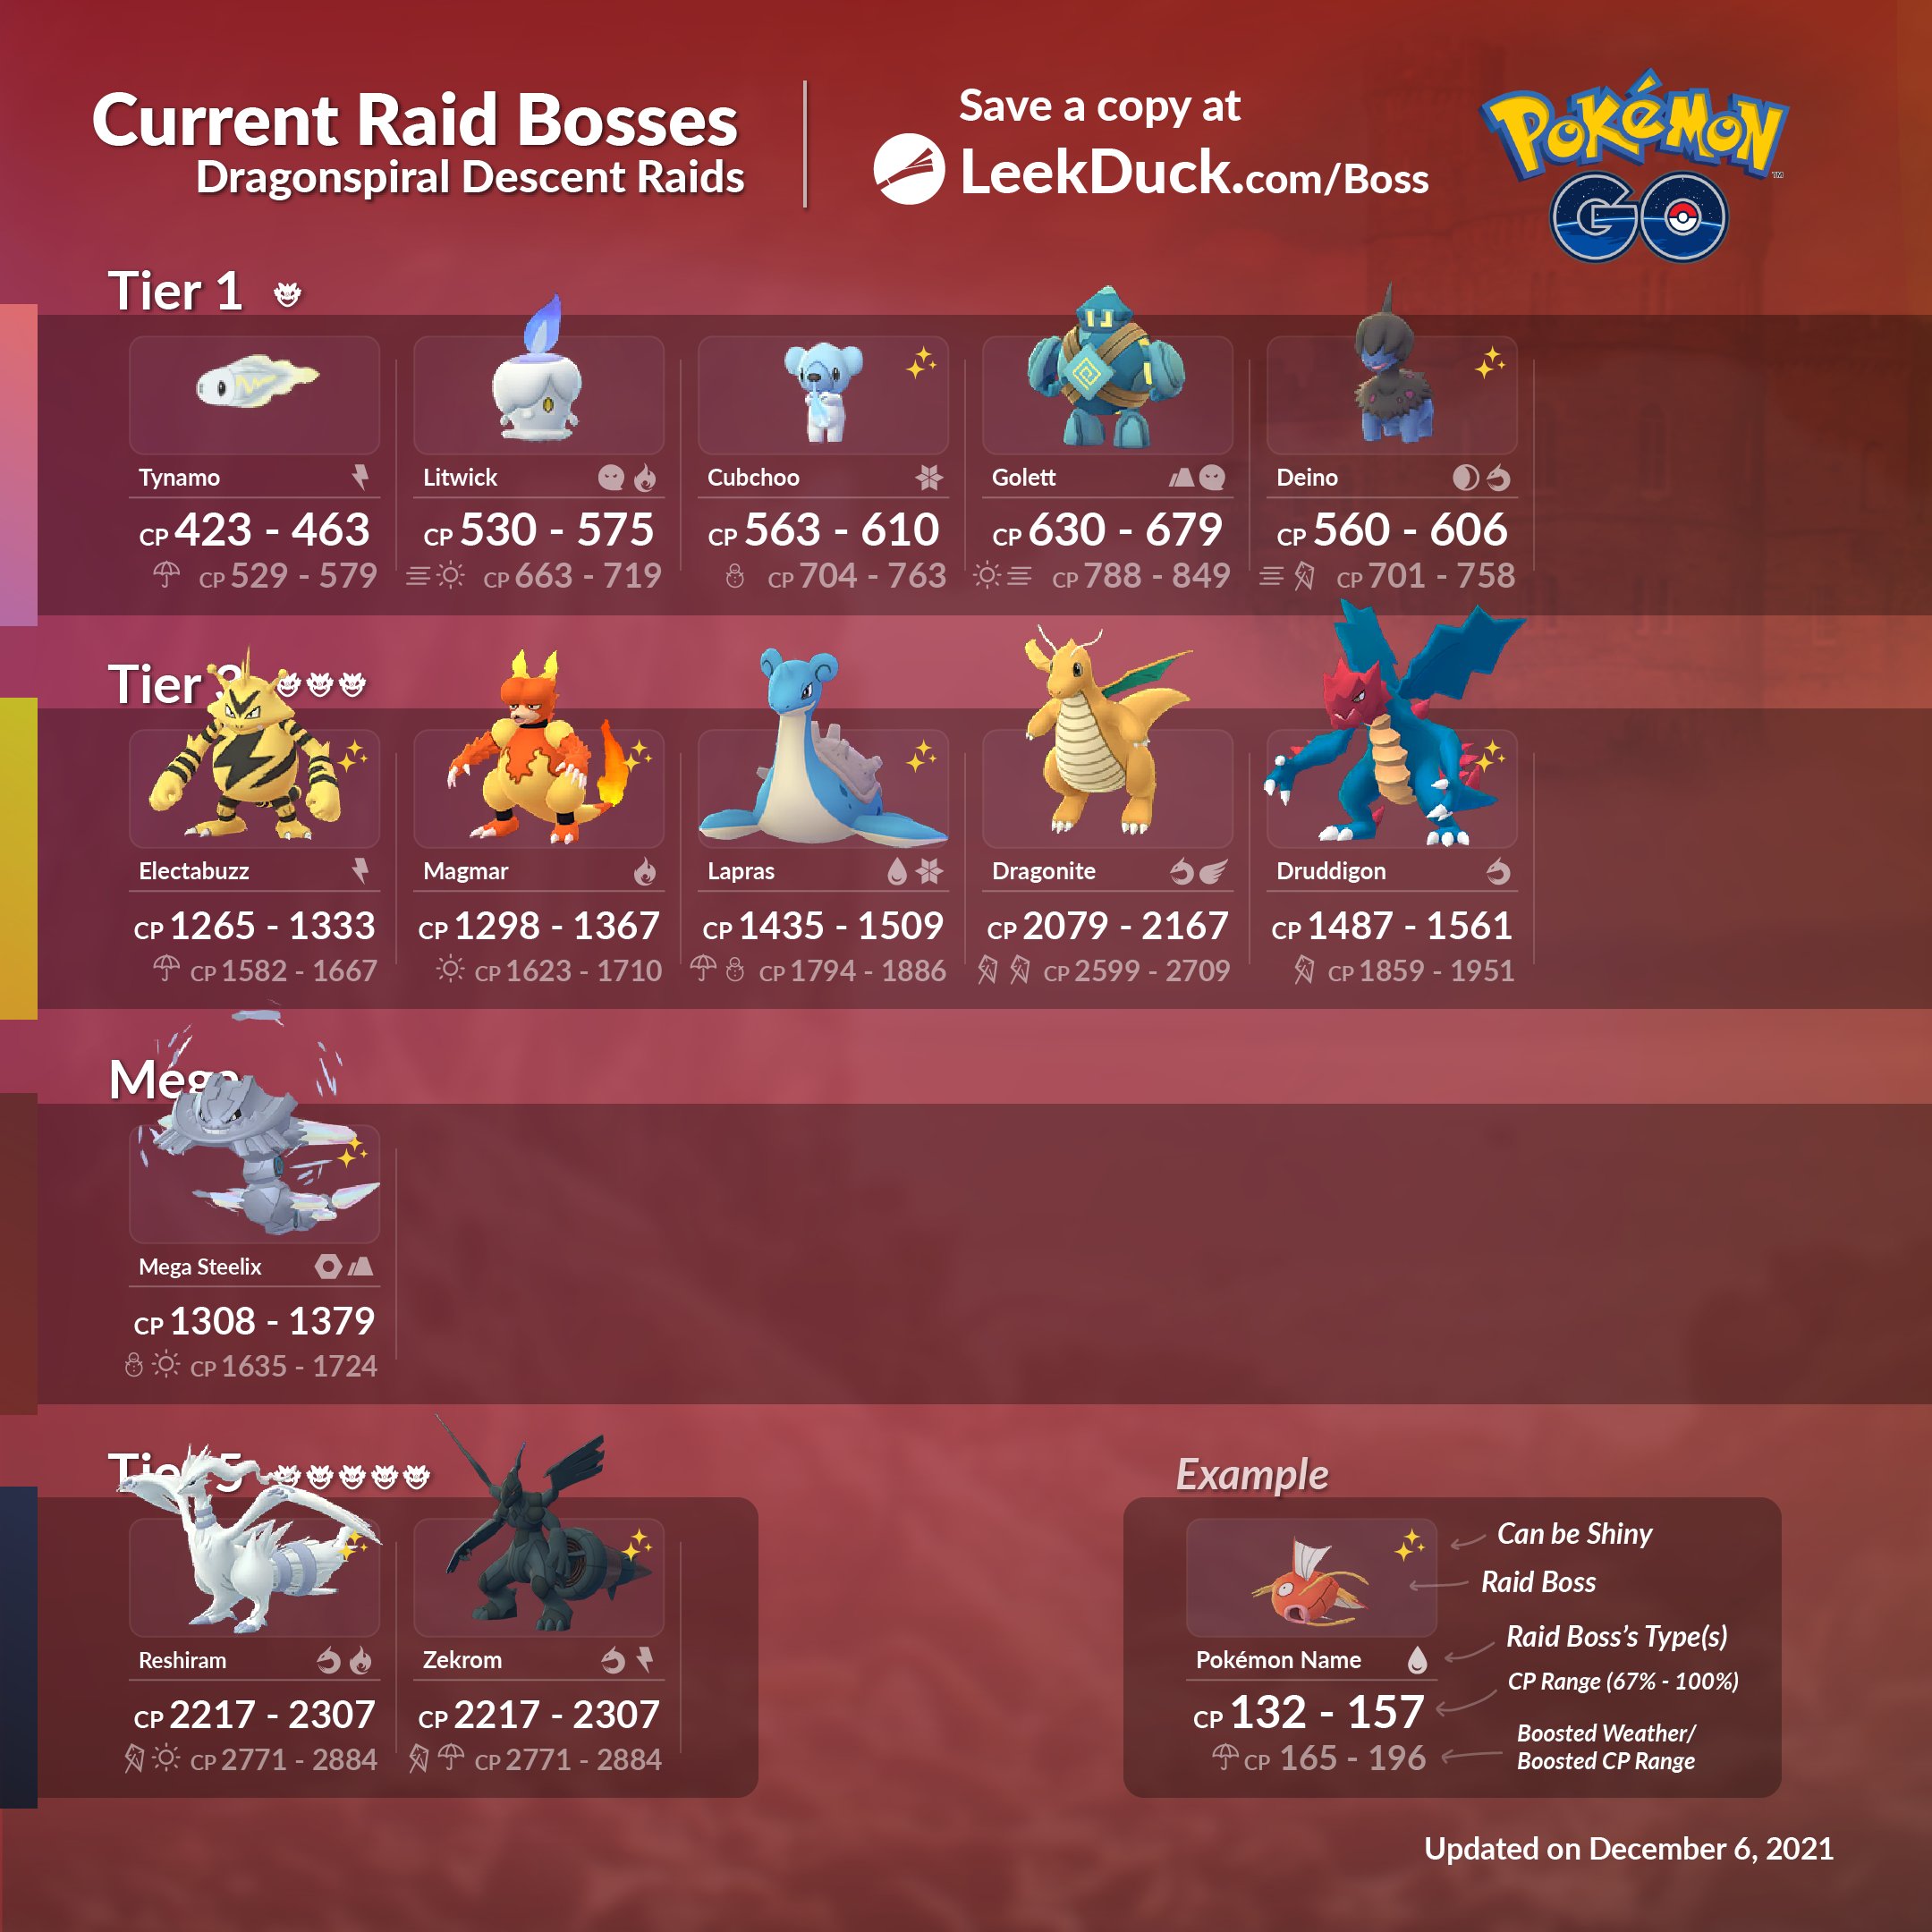 Leek Duck on Twitter: "Current Raid Bosses - Dragonspiral • These raid bosses will be available in your area beginning on December 7, at 10 am local time. Join and host